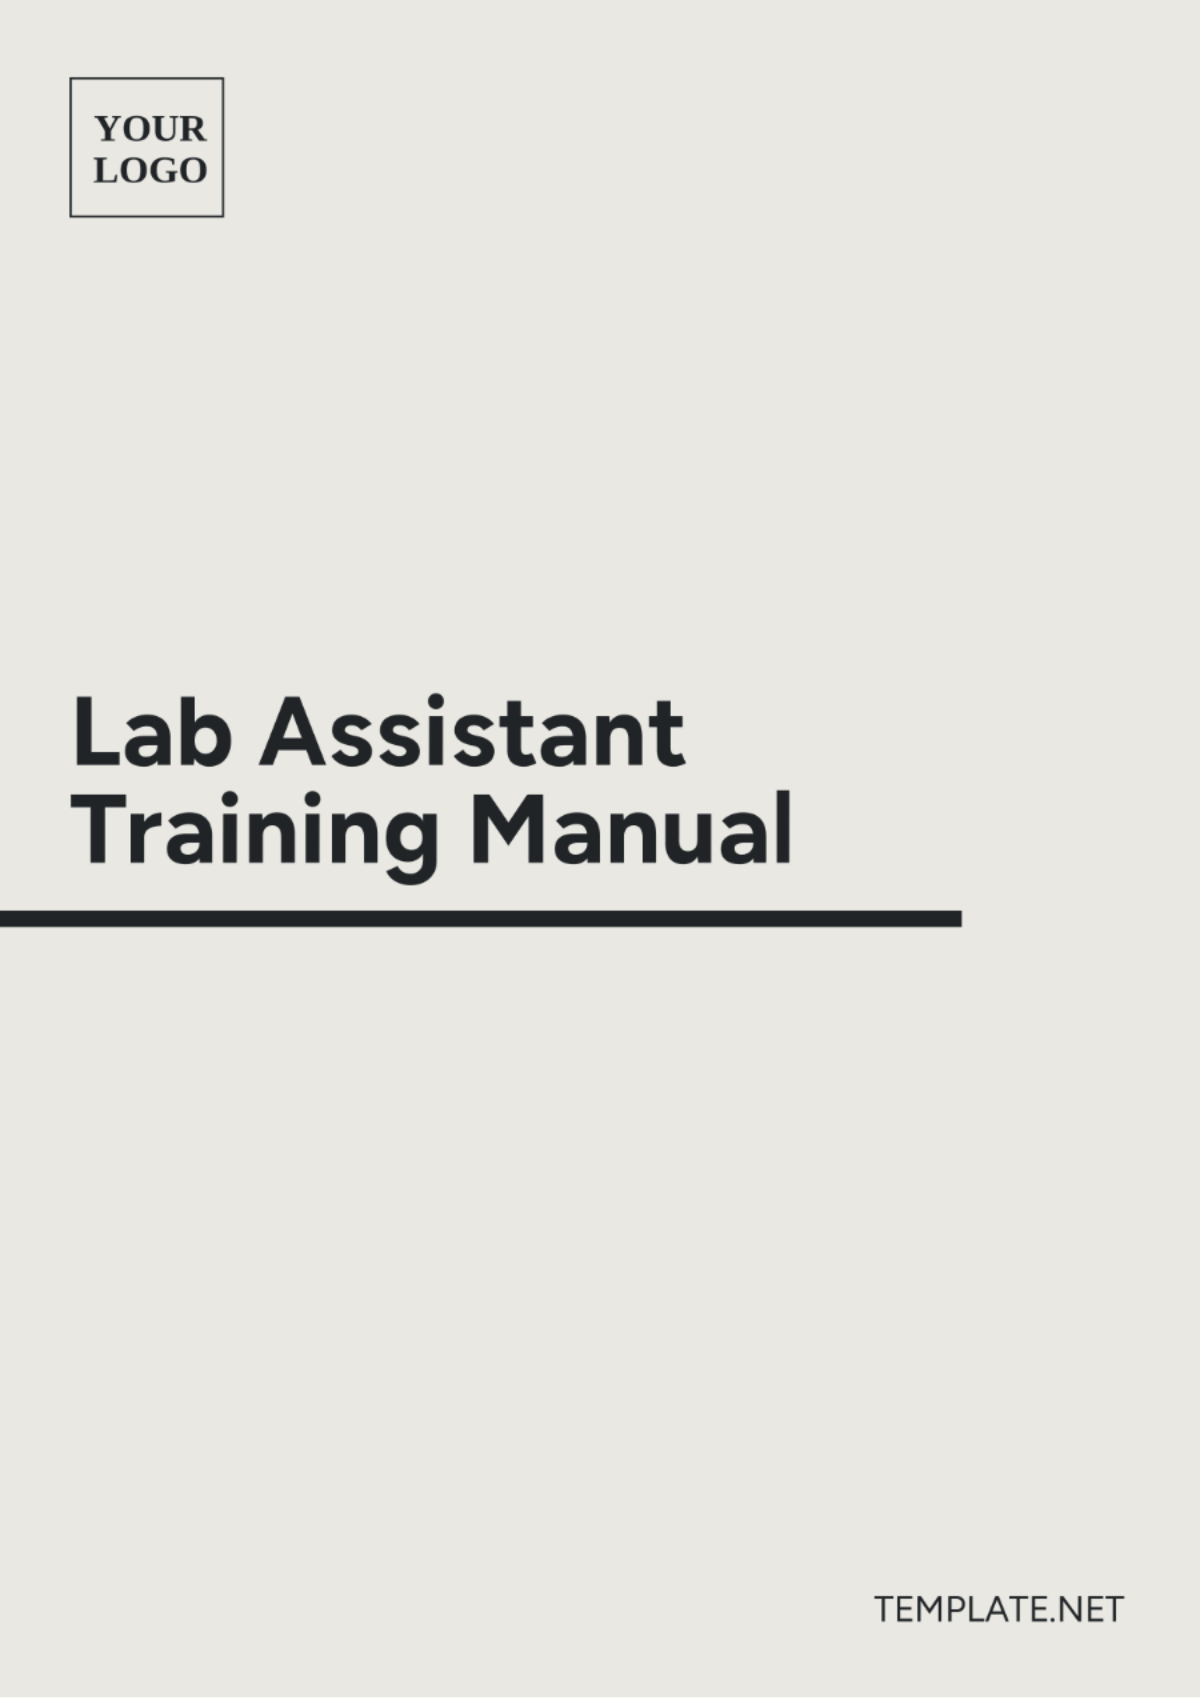 Lab Assistant Training Manual Template